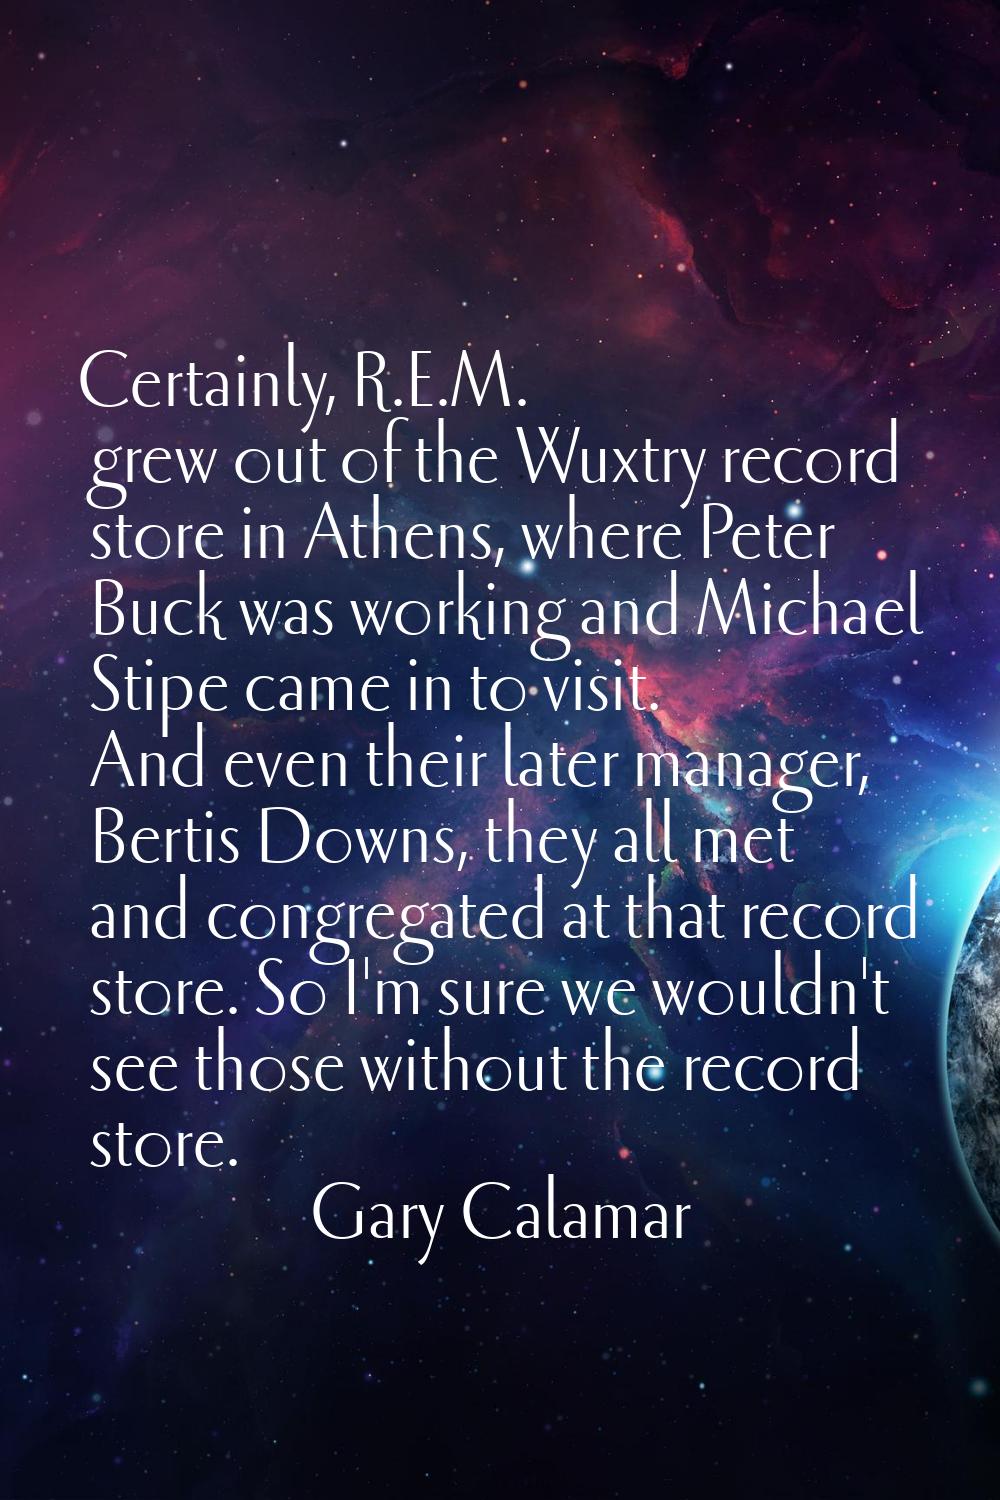 Certainly, R.E.M. grew out of the Wuxtry record store in Athens, where Peter Buck was working and M